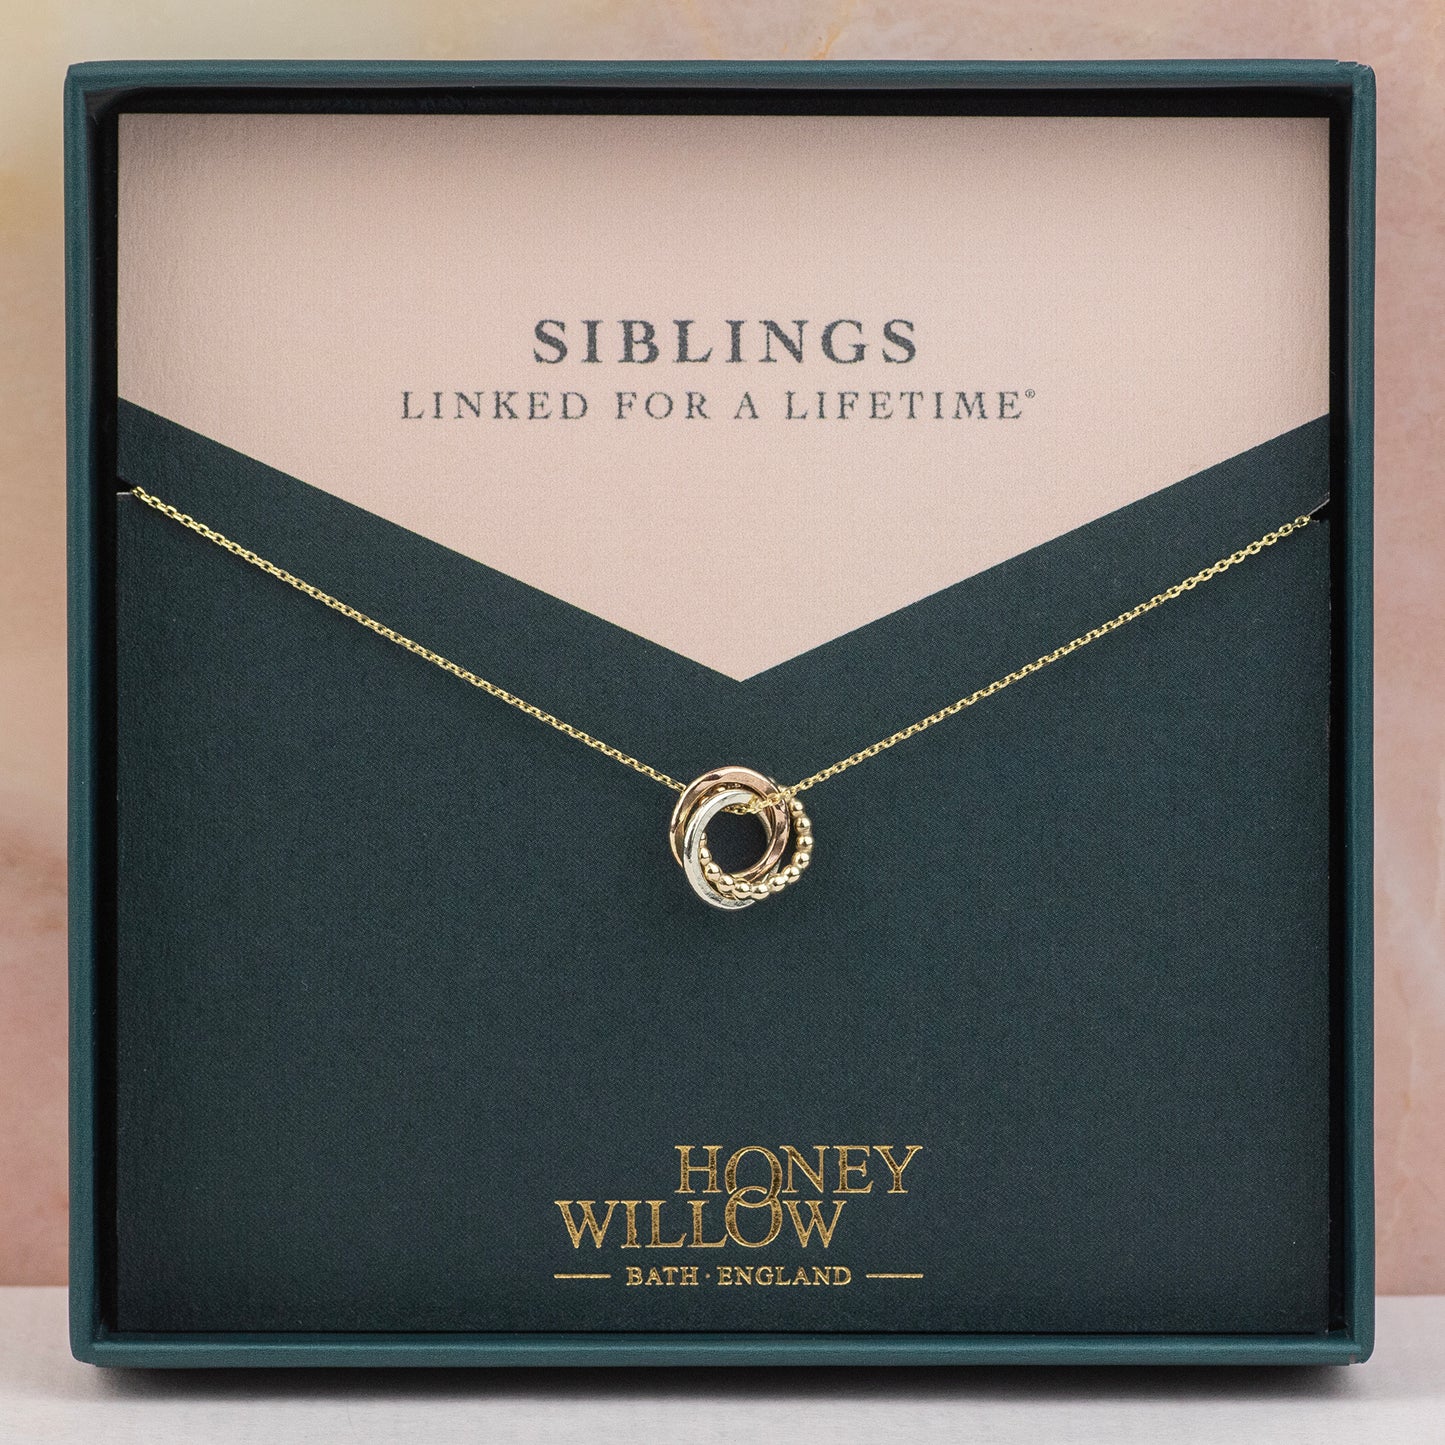 3 Siblings Necklace - 9kt Gold, Rose Gold & Silver Love Knot Necklace